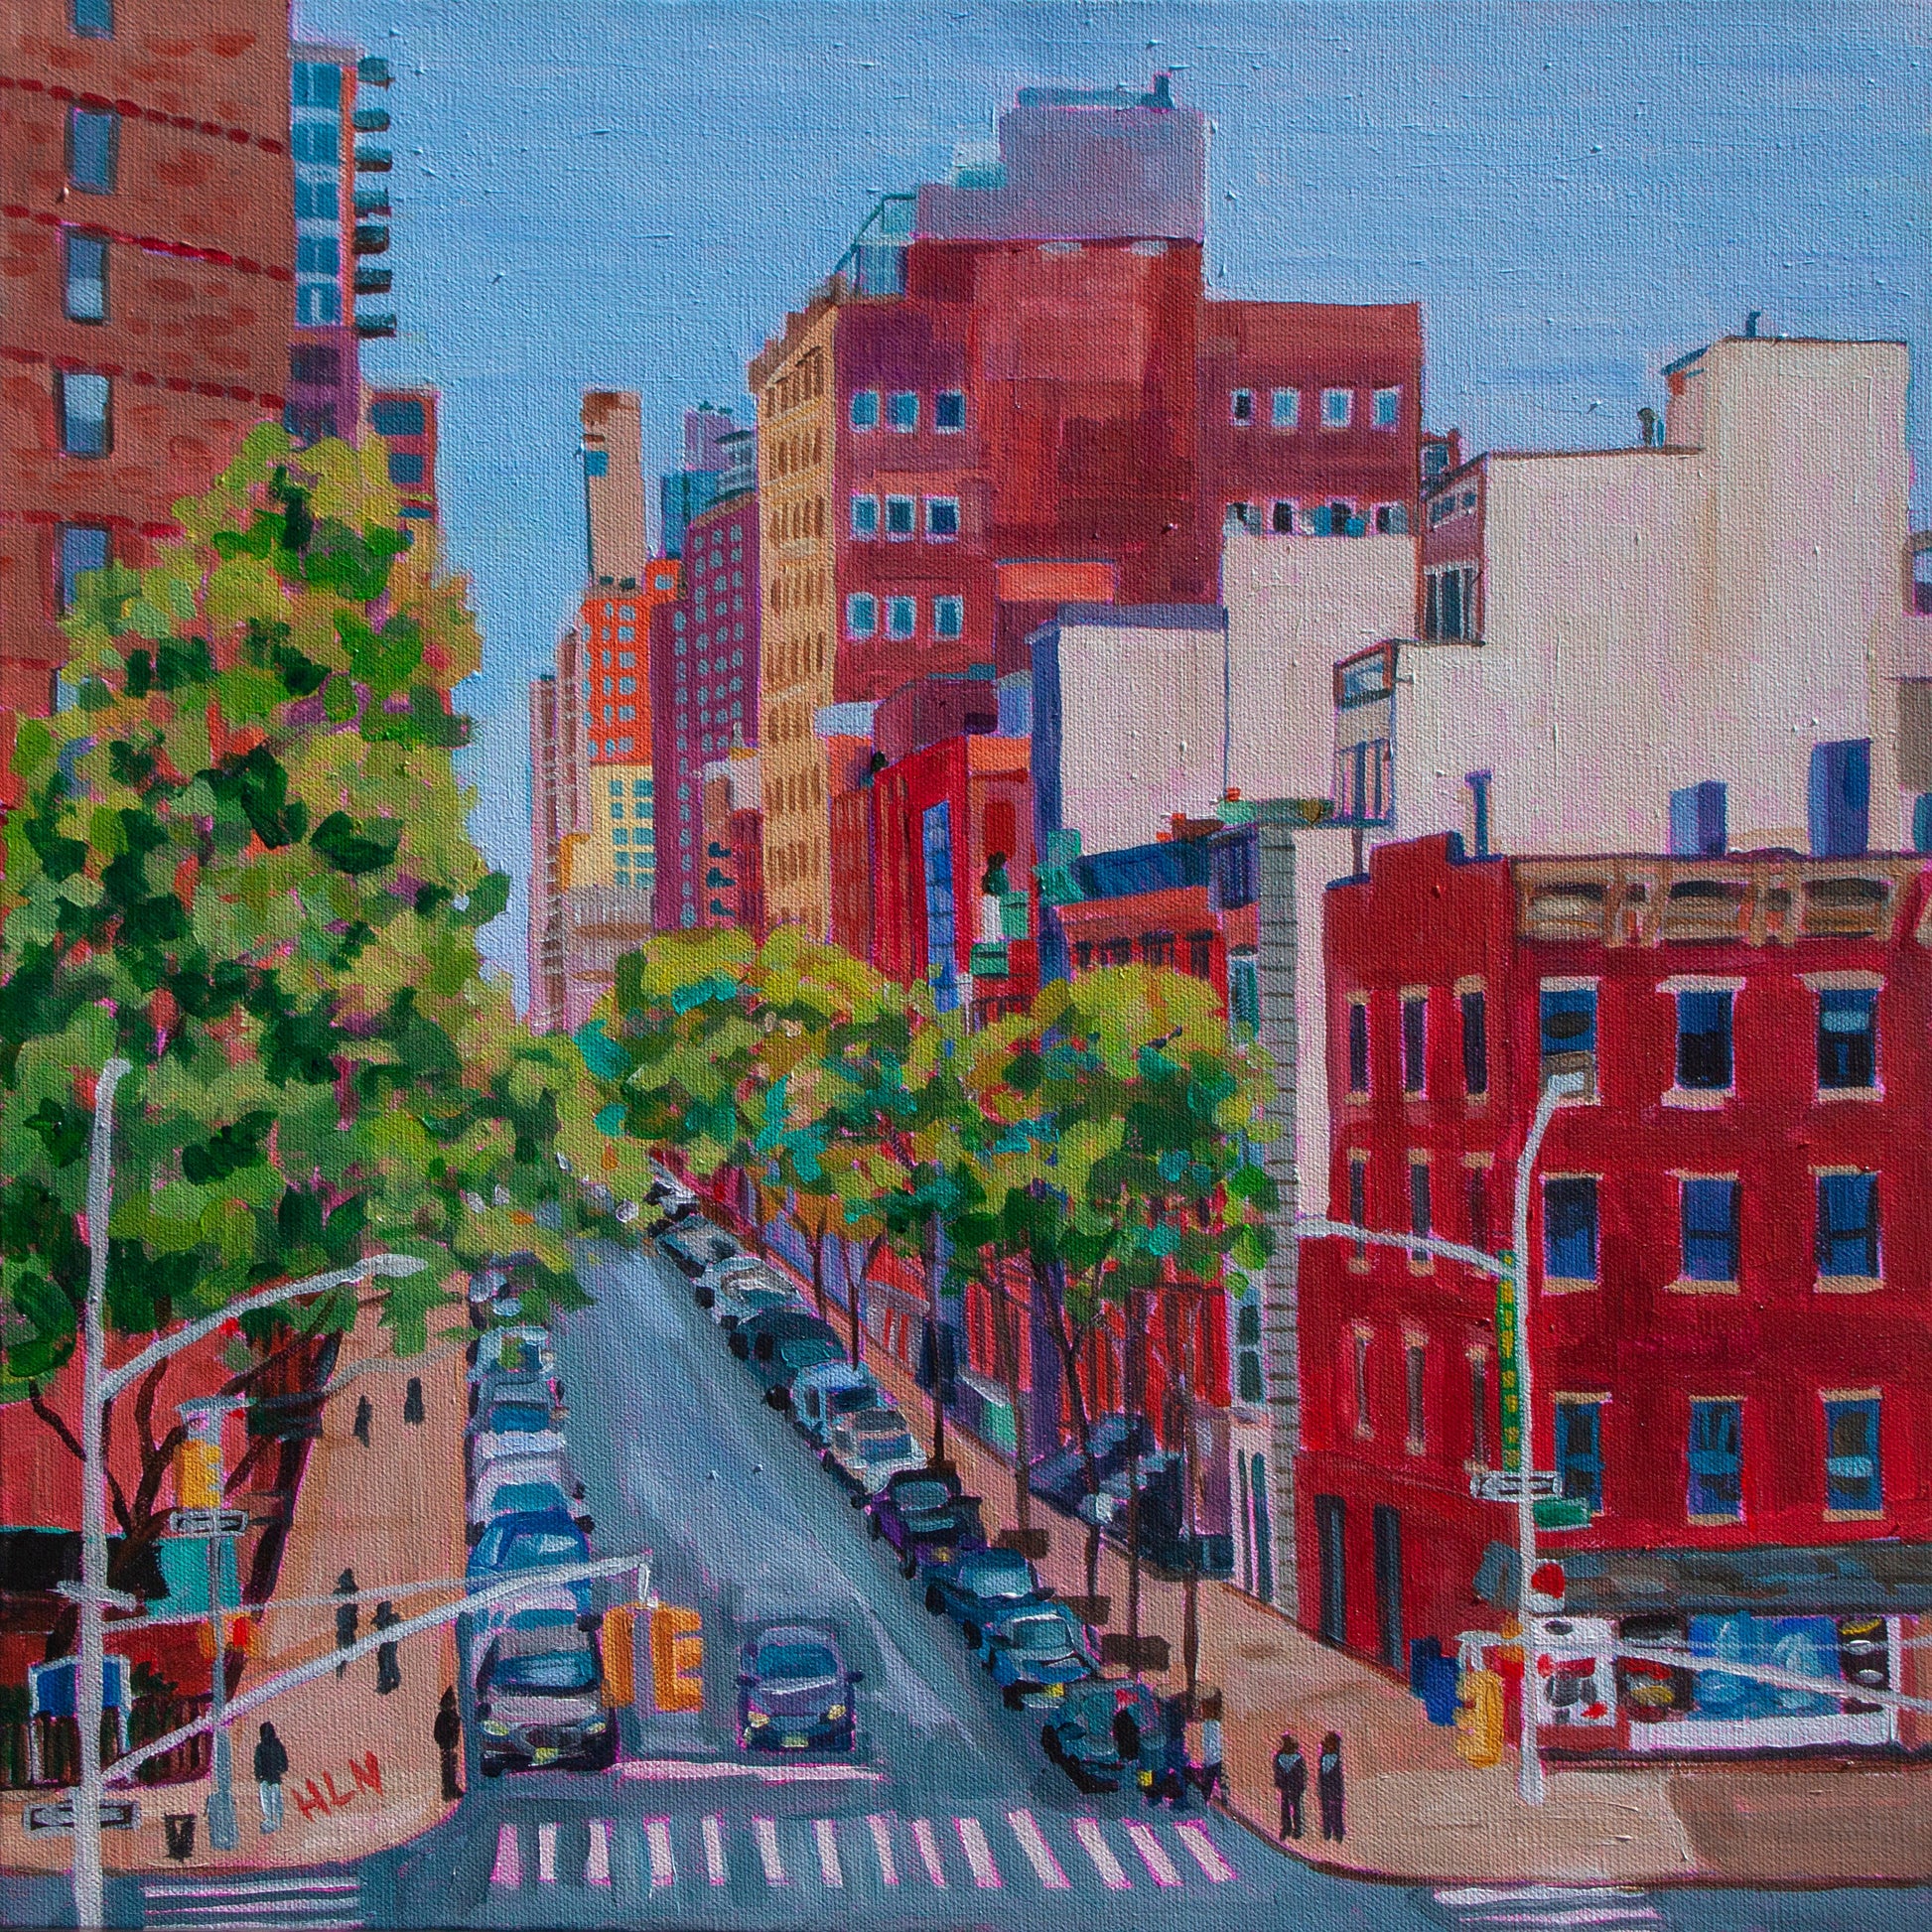 New York City Painting of buildings as seen from the Highline